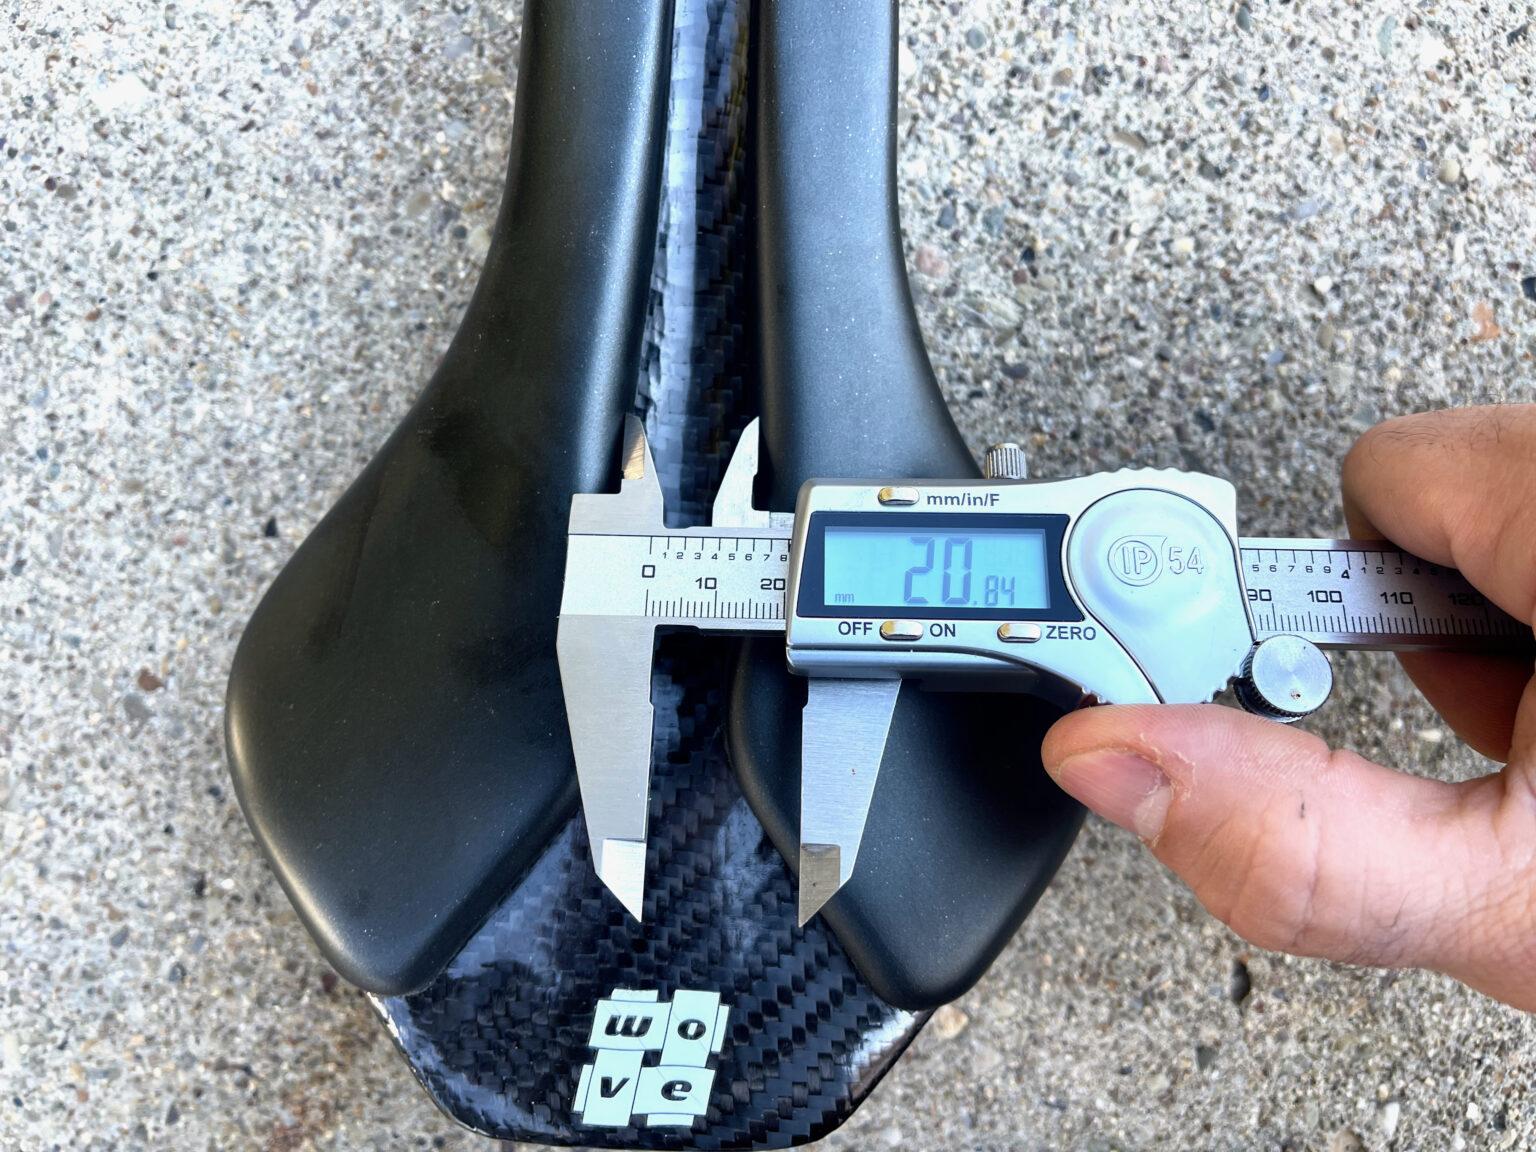 WOVE Mags Saddle Review detail number measurements back channel